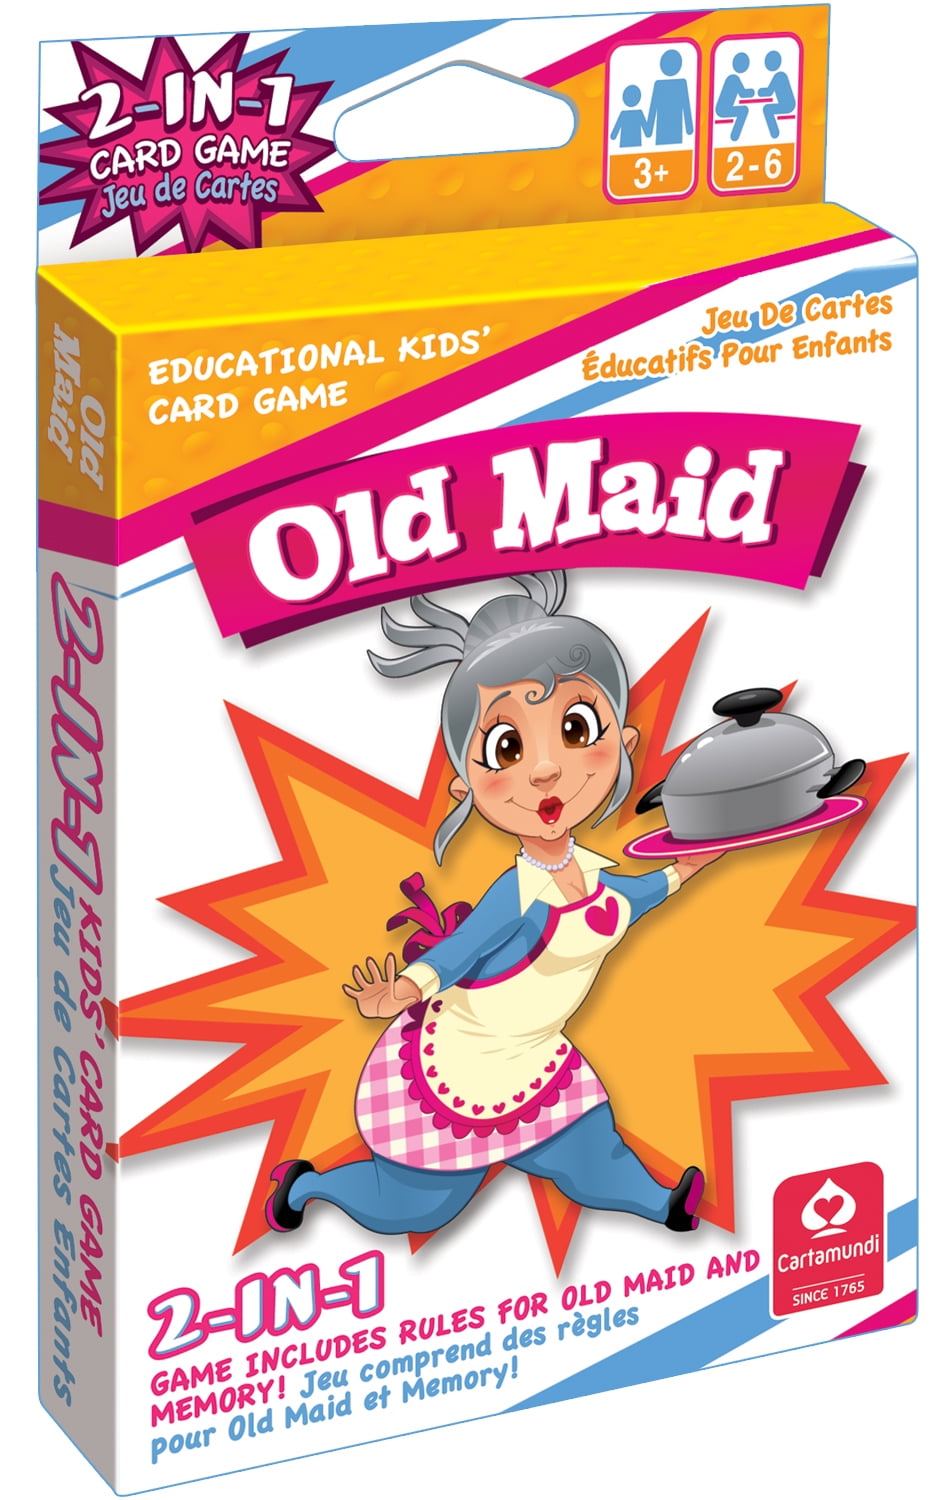 Maid granny How to